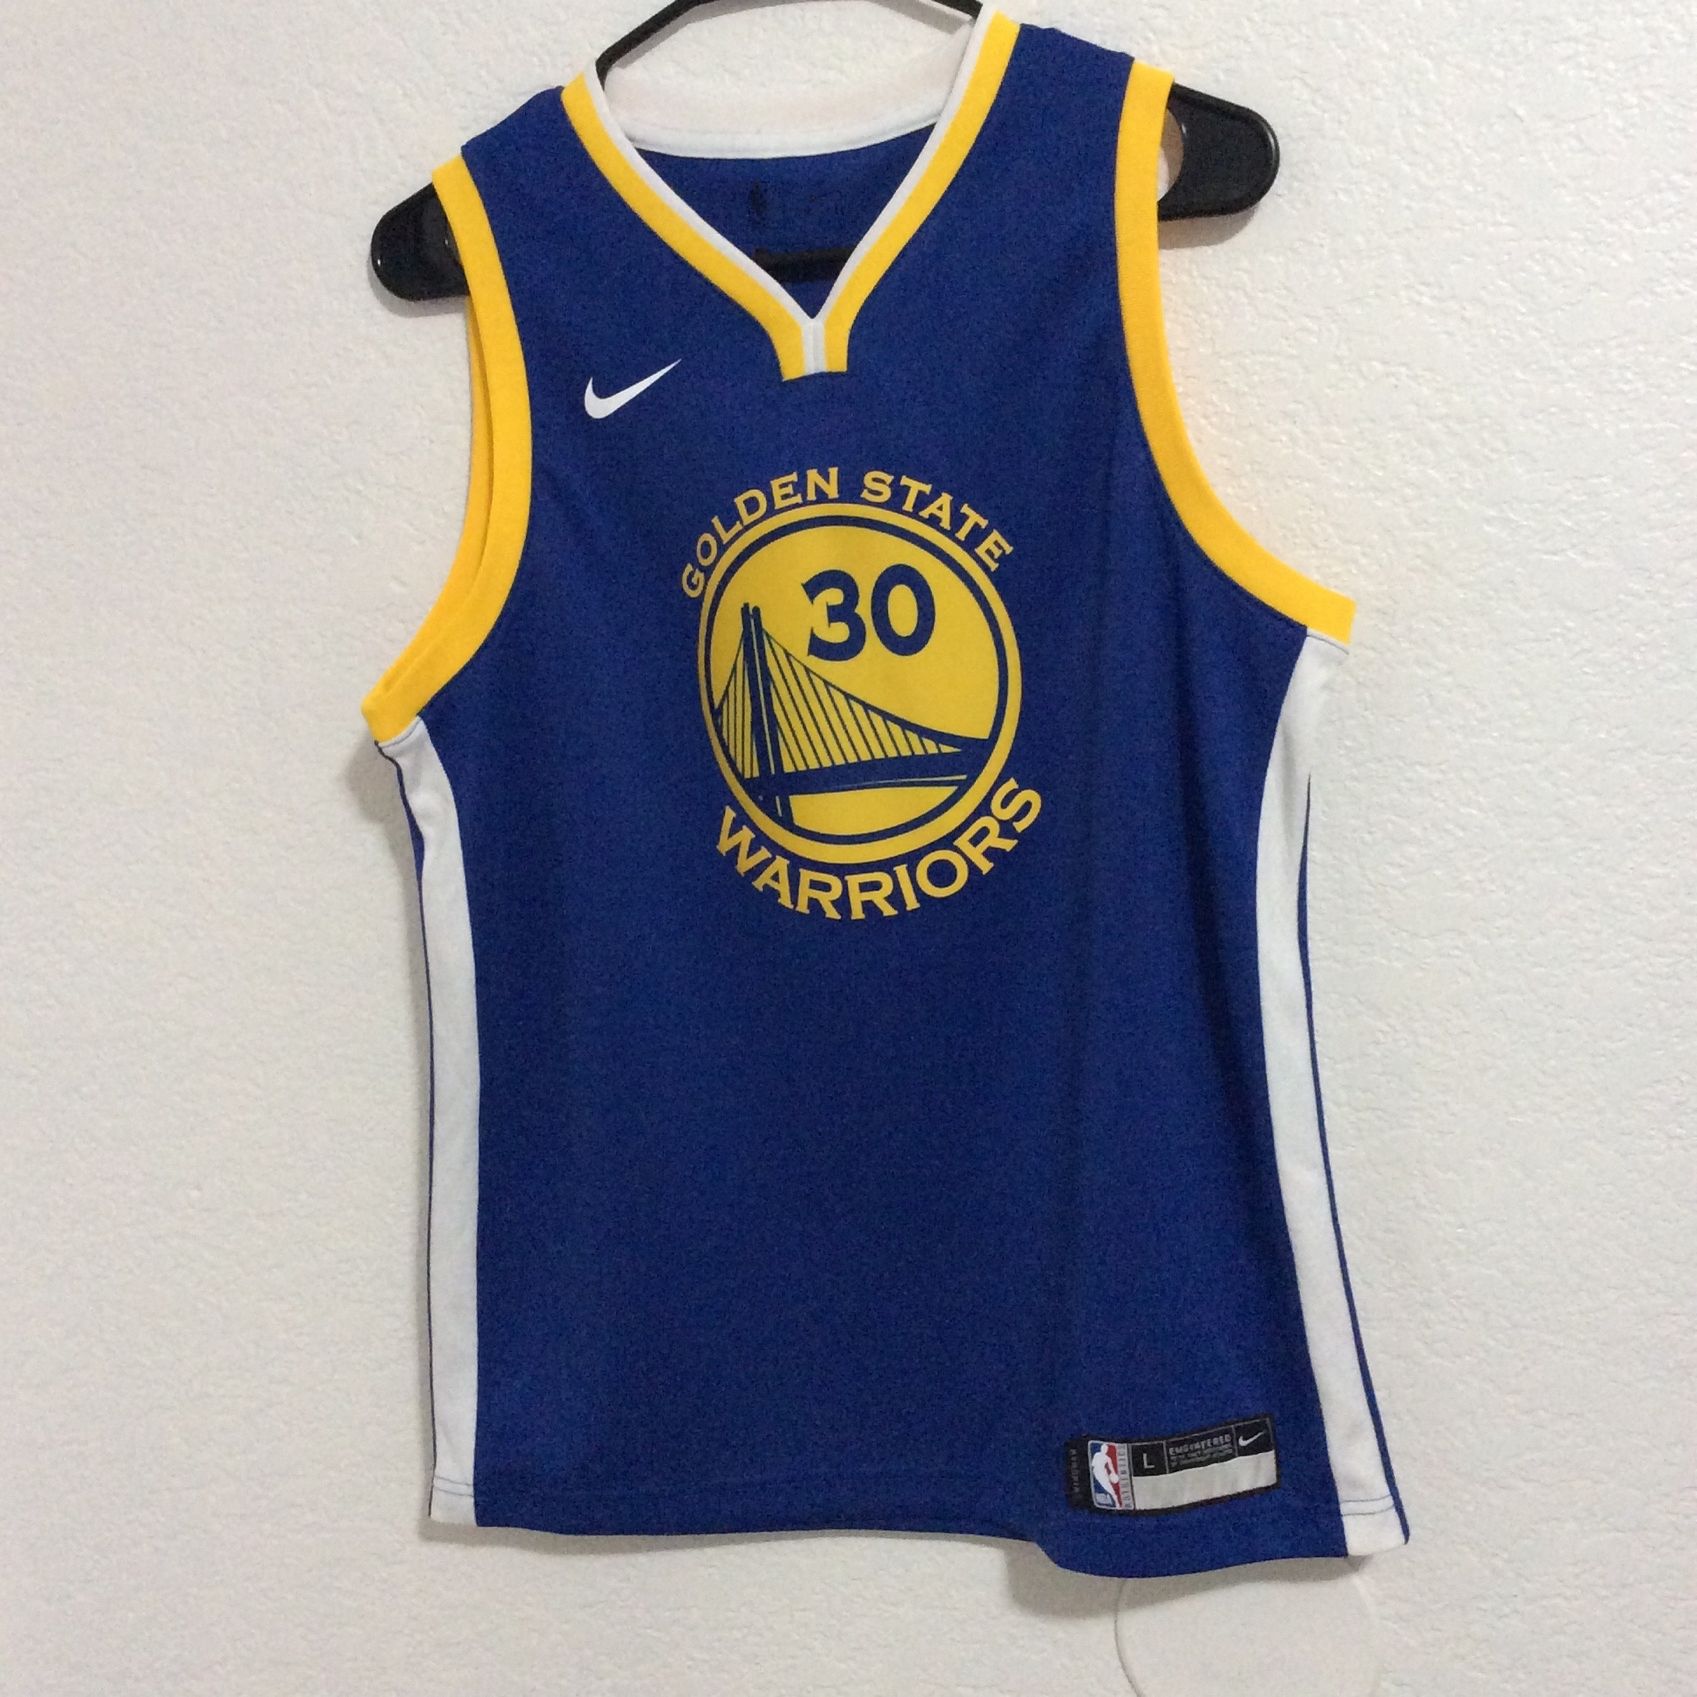 Golden State Warriors Mesh Dog Jersey X-Large for Sale in Fremont, CA -  OfferUp